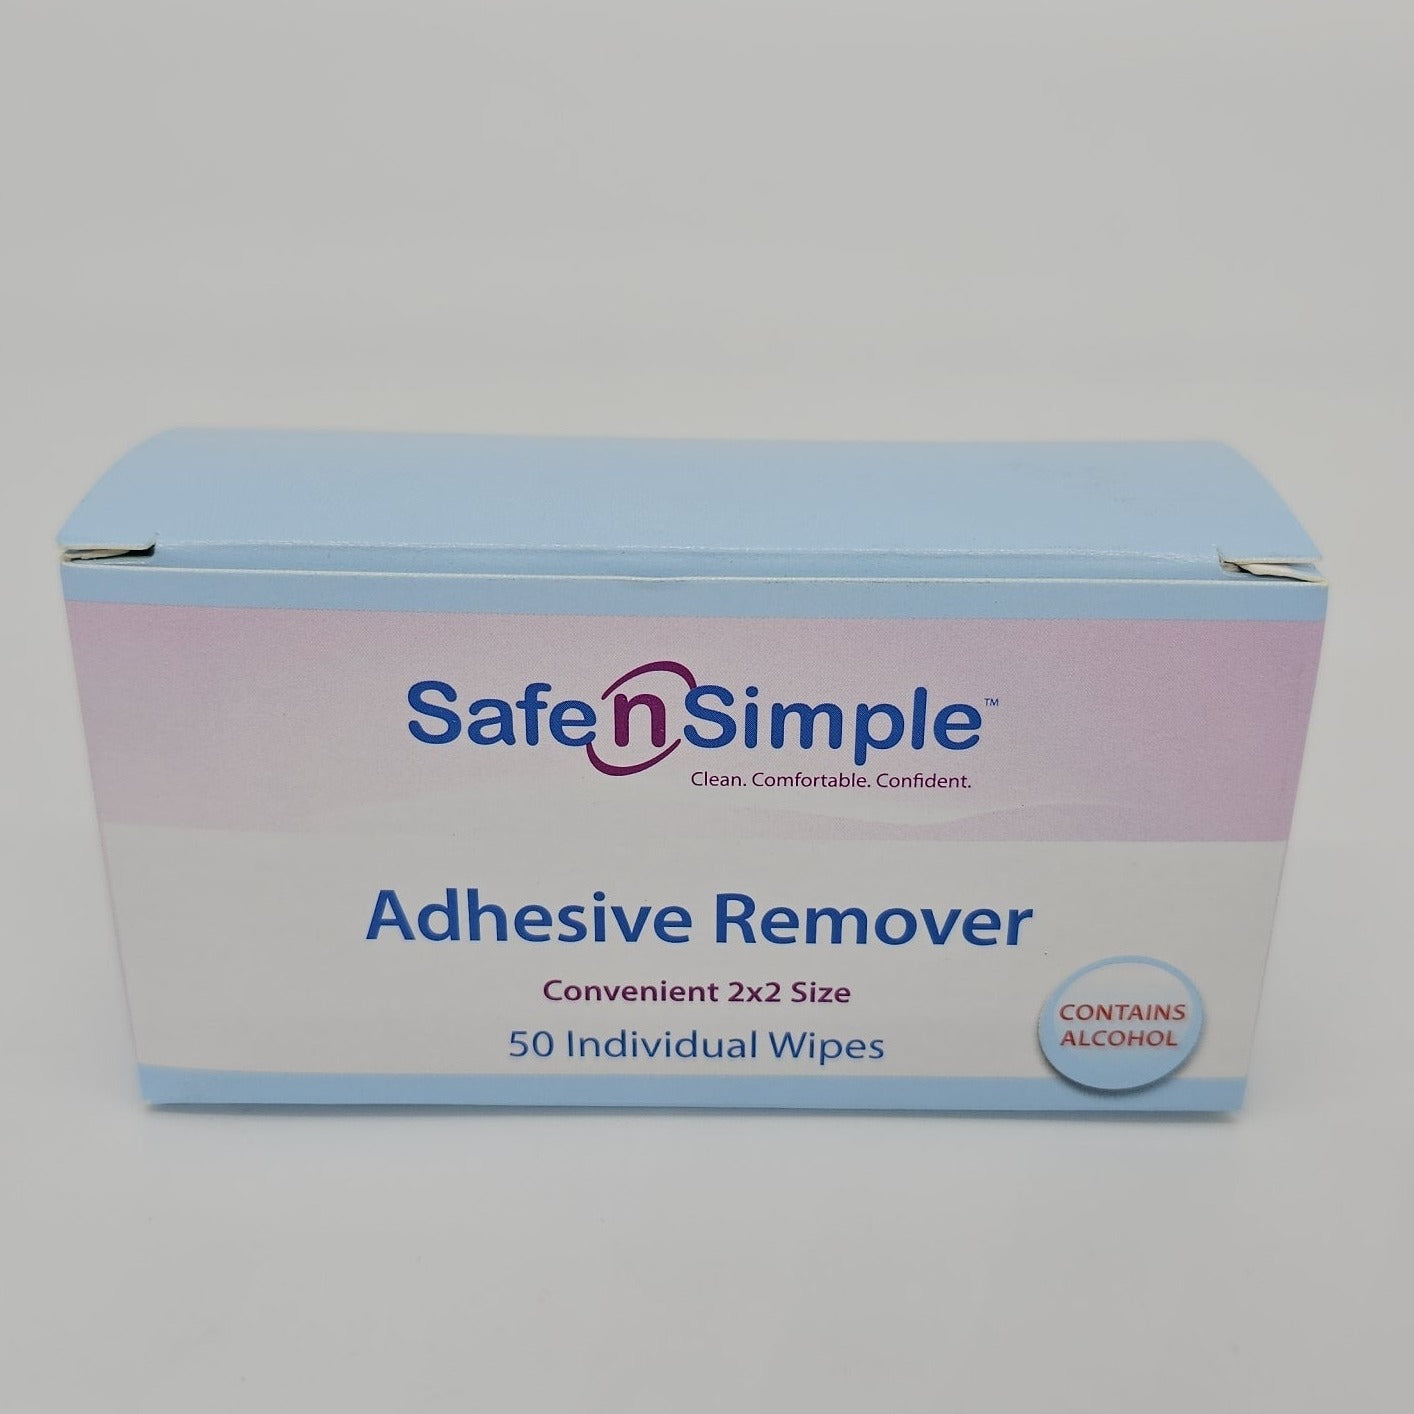 SNS Adhesive Remover | SNS medical | Medical products | New medical products